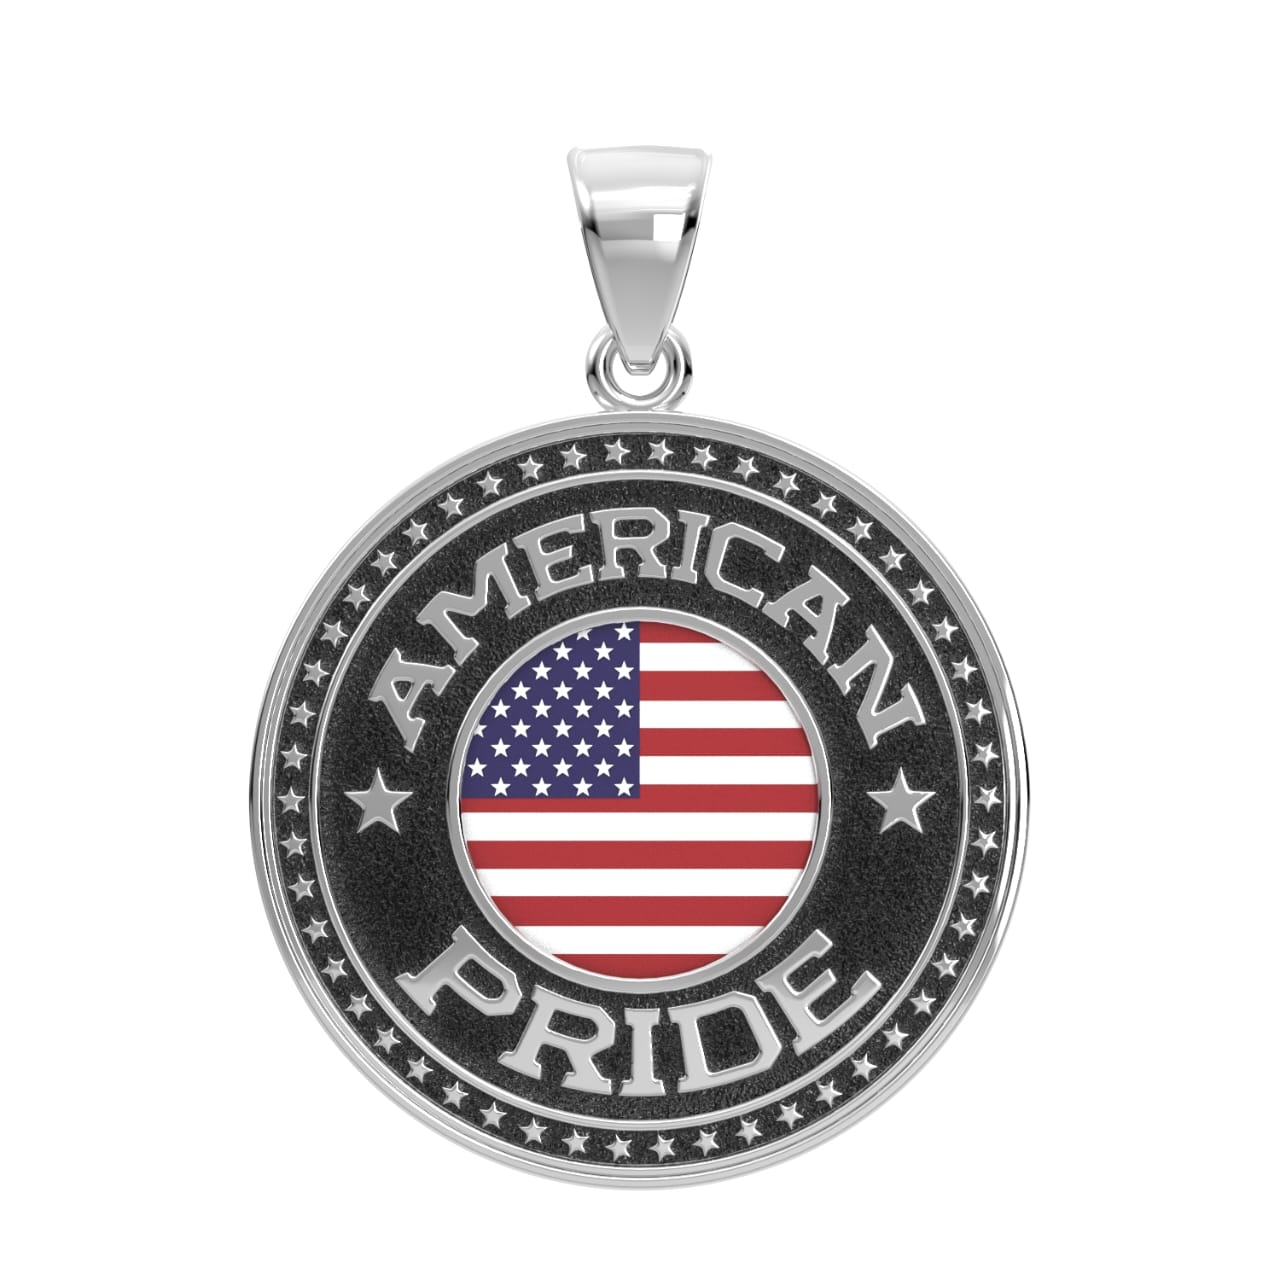 Men's 925 Sterling Silver American Pride Medal Pendant Necklace with Flag, 33mm - US Jewels